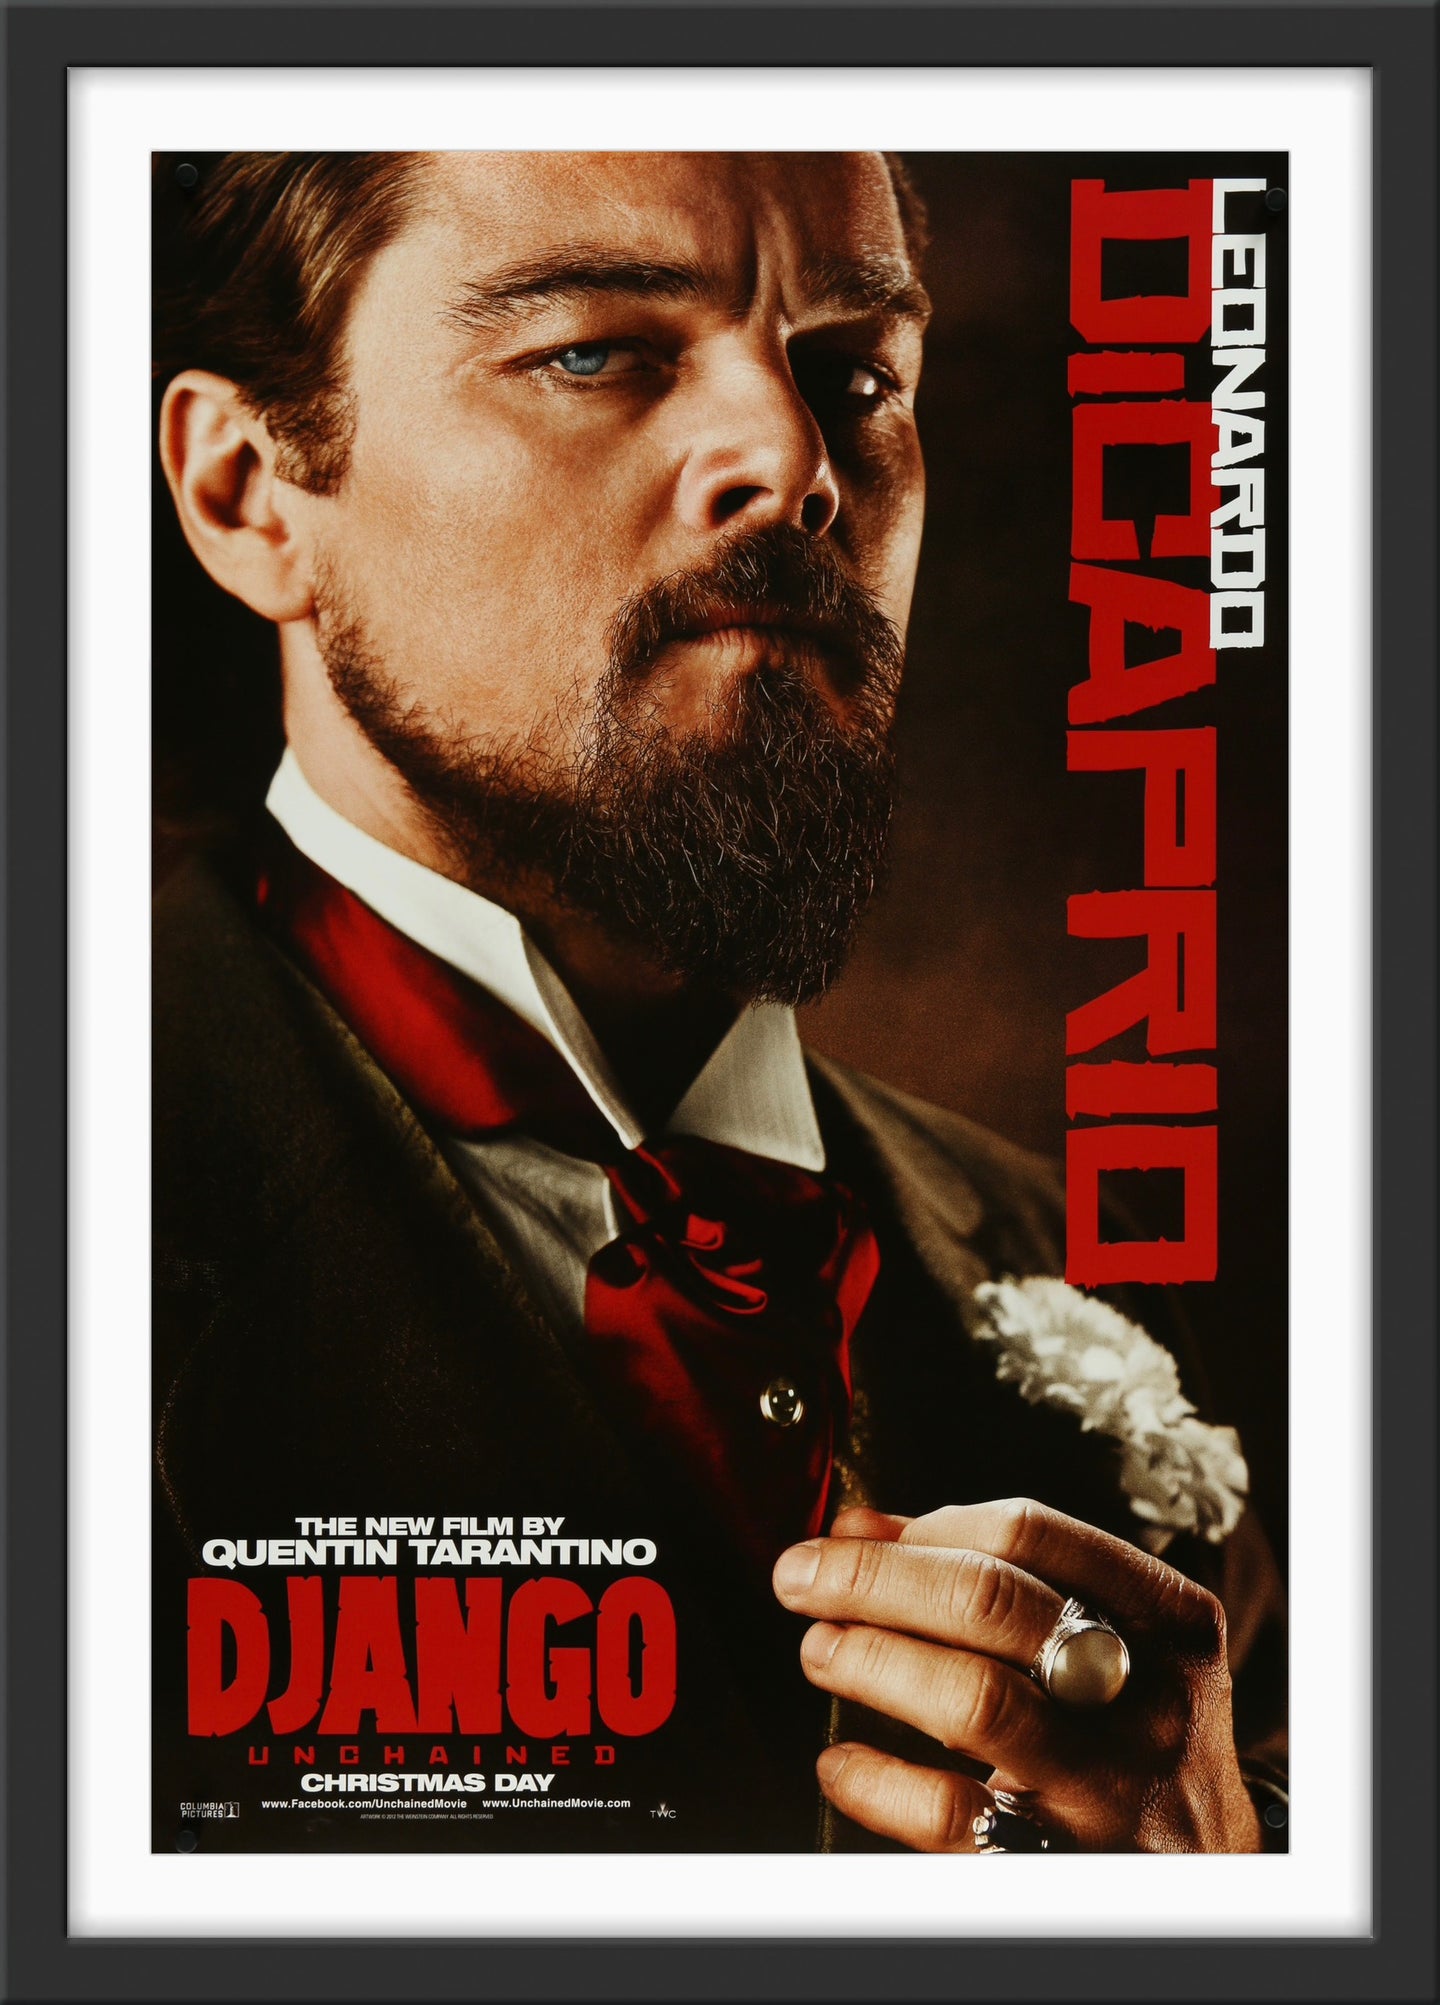 An original movie psoter for the Quentin Tarantino film Django Unchained